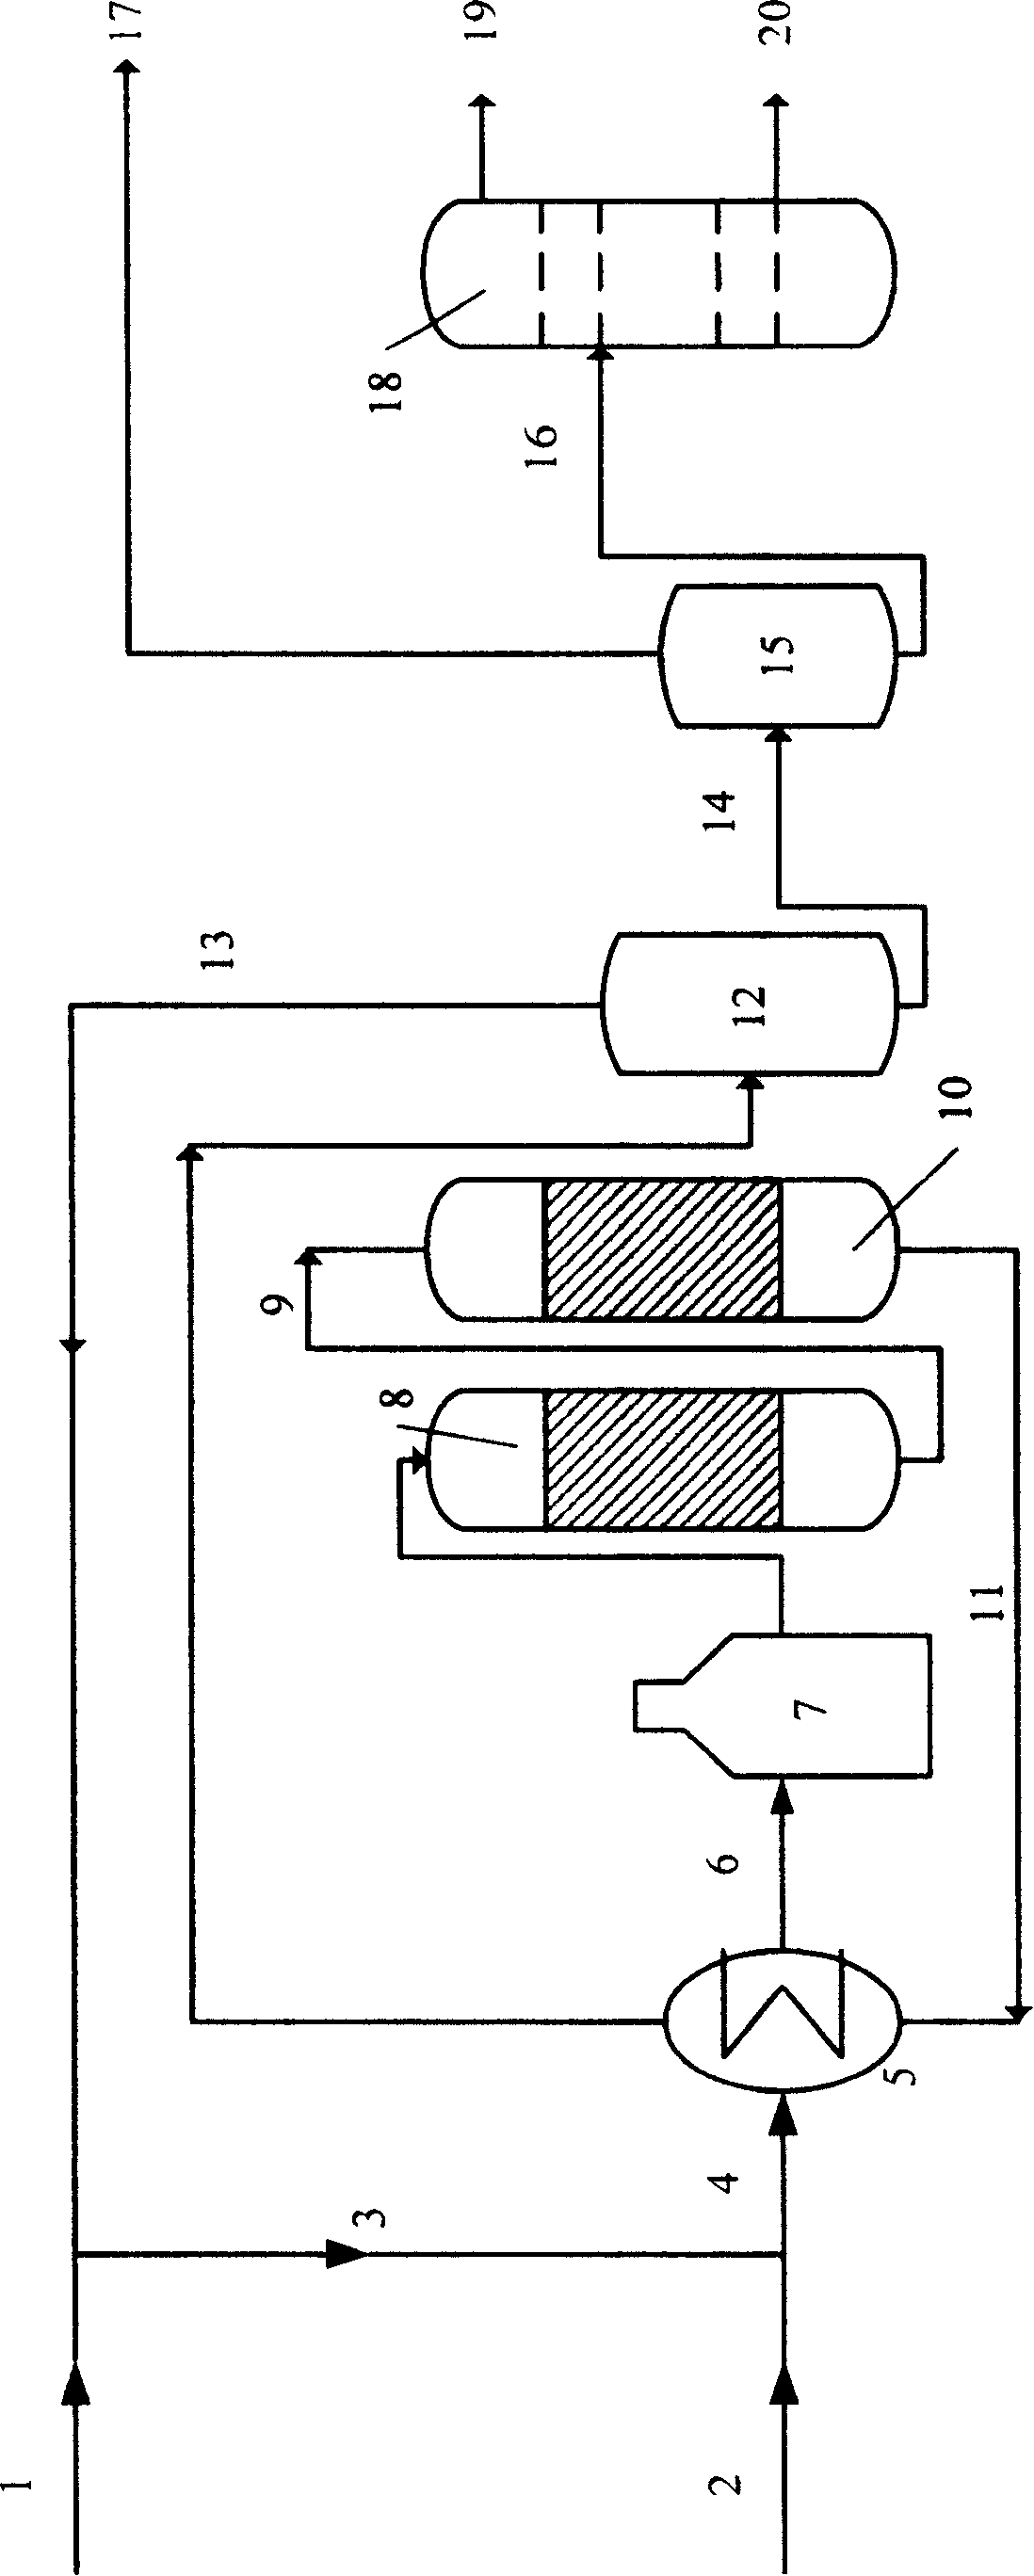 Production method of high-bioctyl-value diesel oil by coal liquification